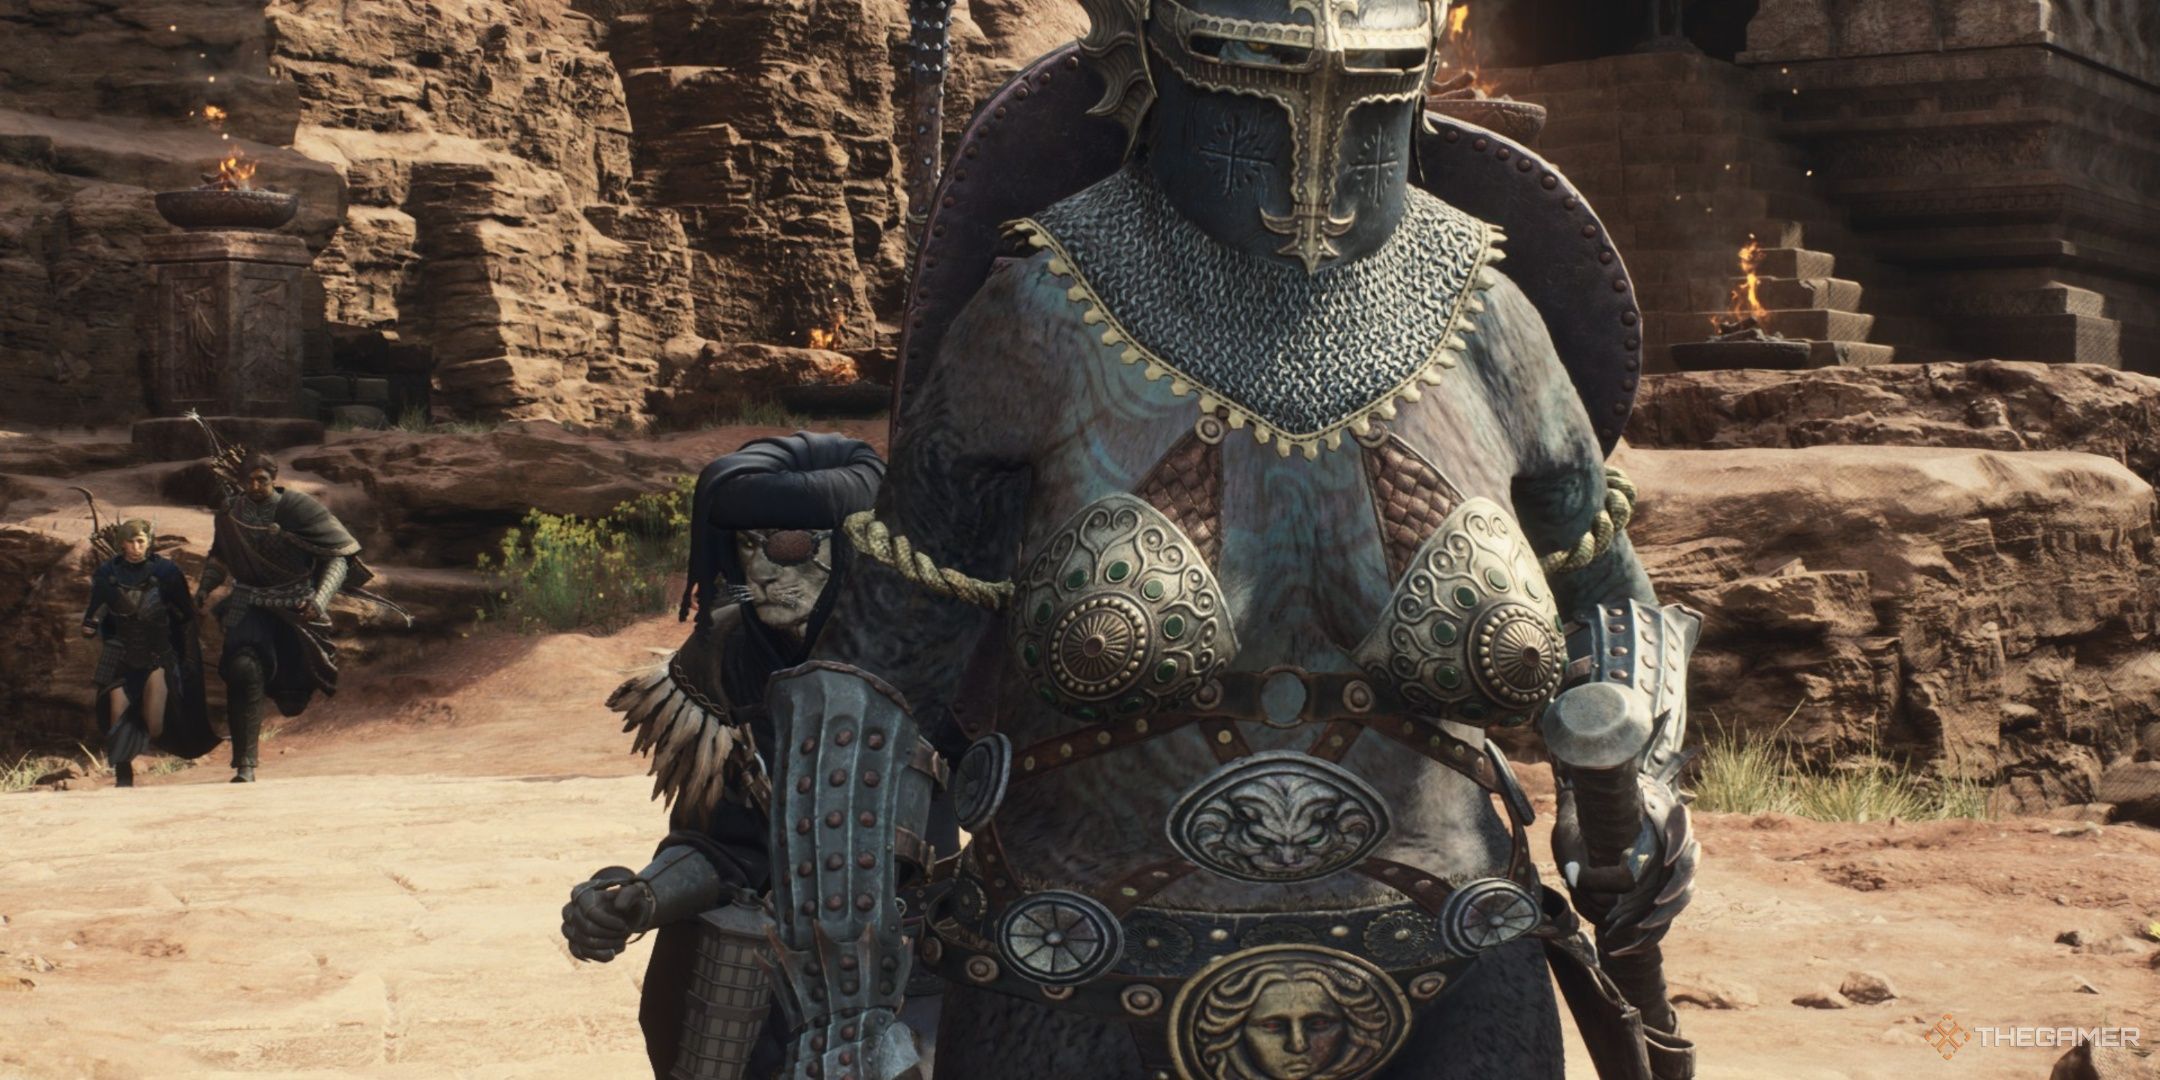 The Arisen hiding behind a wandering Pawn wearing revealing armour in Dragon's Dogma 2